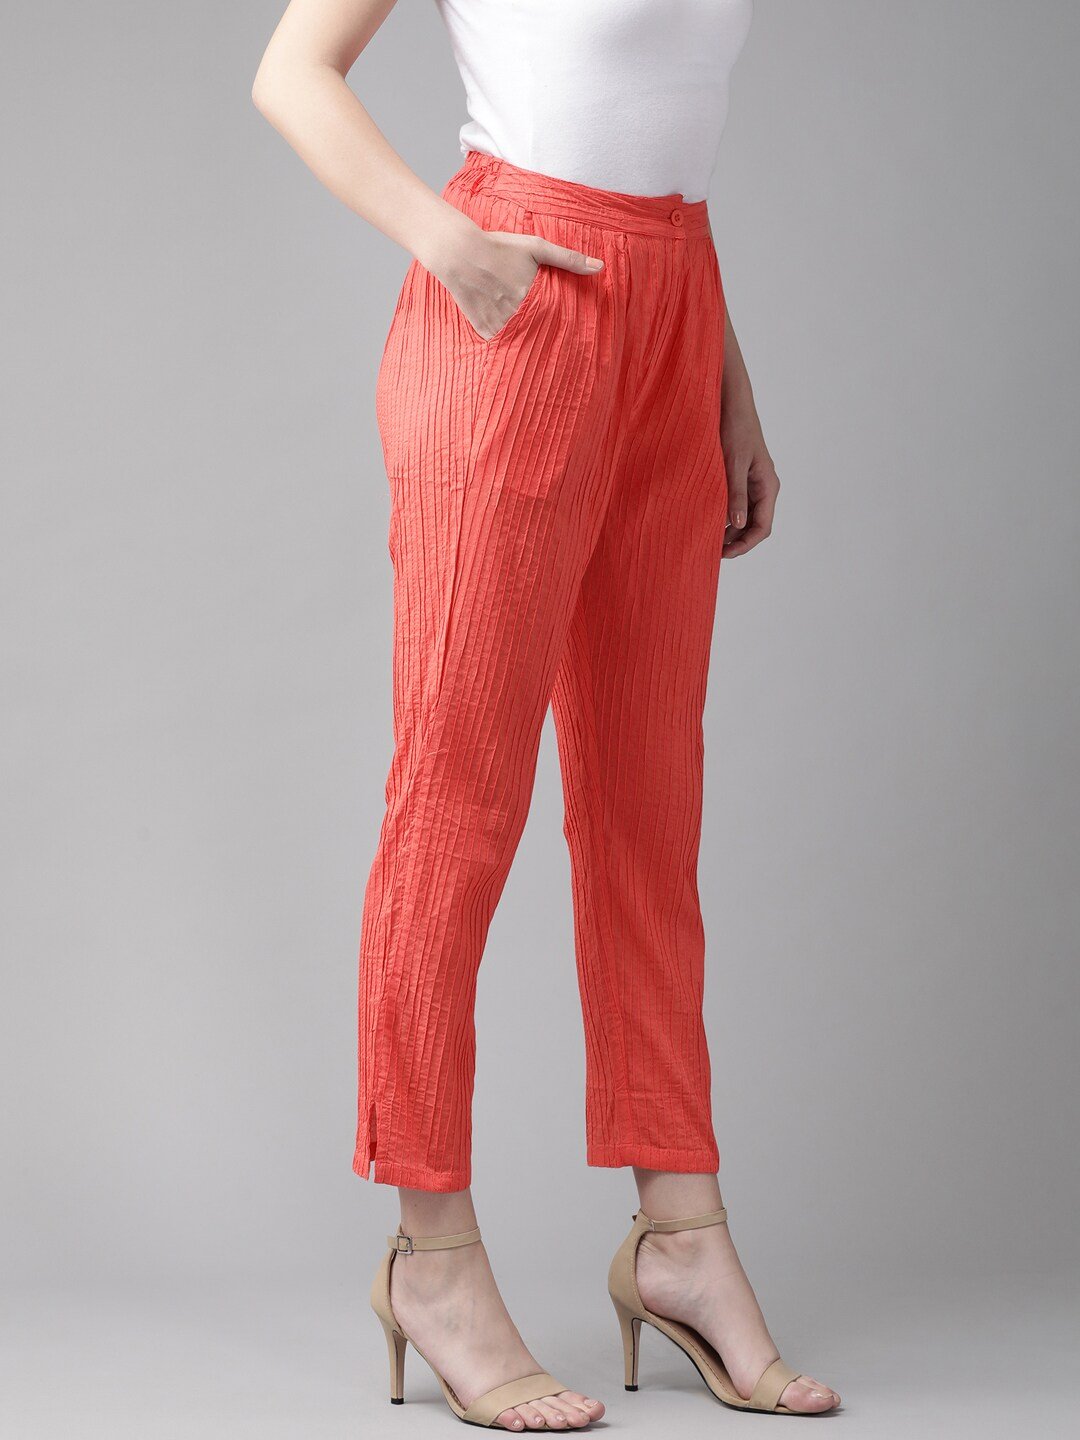 Women's  Peach-Coloured Regular Fit Solid Regular 3/4Th Trousers - AKS